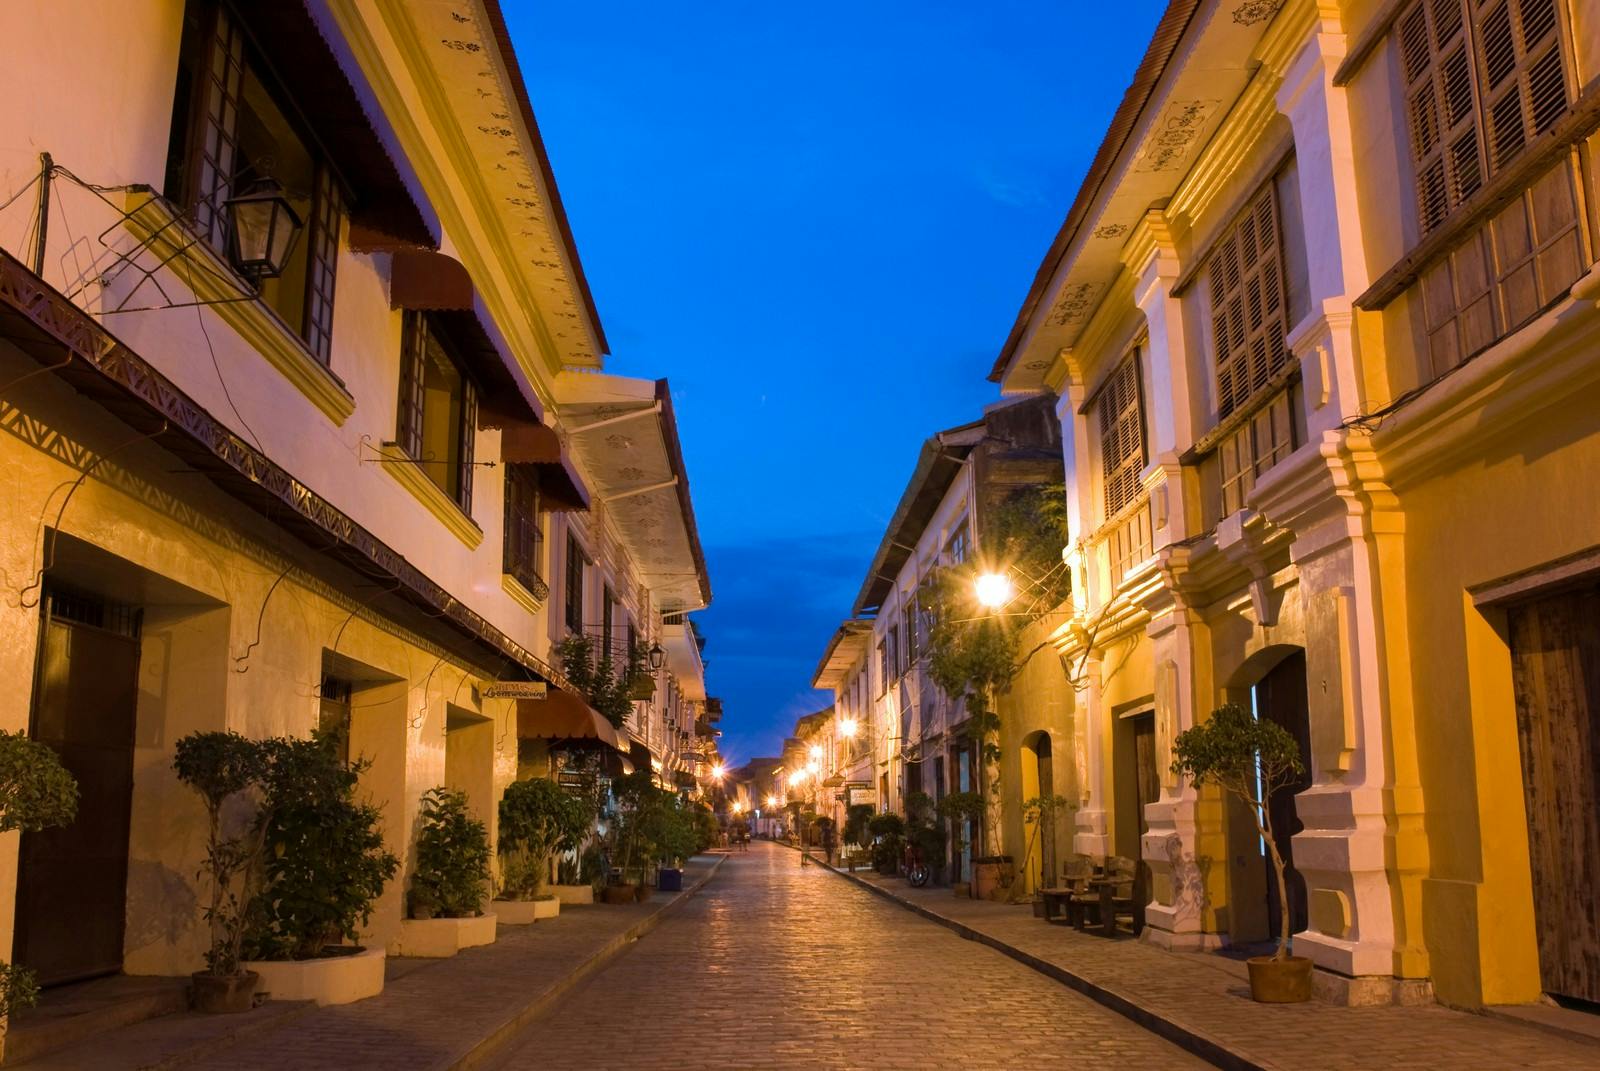 View of Calle Crisologo at night